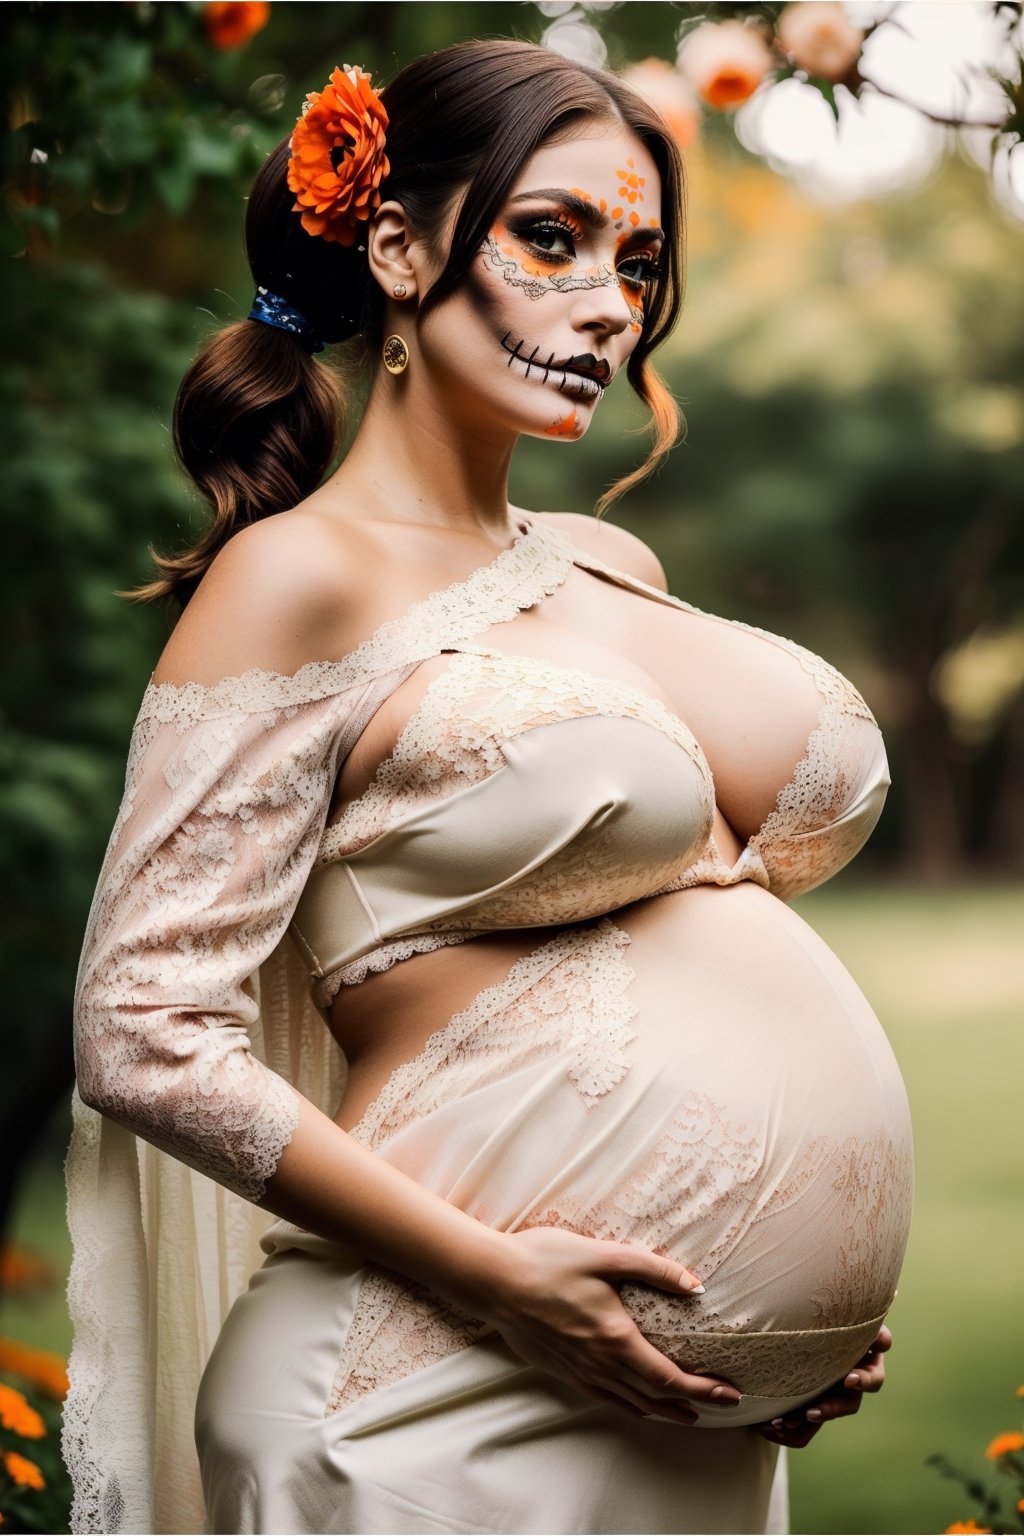 Best quality,8k,32k,Masterpiece, (UHD::1.2),full body potrait of a young woman with Catrina makeup ((latina)), ((hazel_eyes, bright)), extremely detailed eyes, dia de los muertos,(white make up,orange,black makeup,emulating a skull with the make up,orange flowers as ornament in hair),many orange flowers,attractive features,eyes,eyelid,focus,depth of field,film grain,ray tracing,contrast lipstick,slim model,backlit,(impossible_fit),((pregnant, holding pregnant belly)),(((wearing vintage lace mexican gown))),((large_breasts)), absolute_cleavage,plump breasts, detailed natural real skin texture,visible skin pores,anatomically correct,night,Coyoacán background,Catrina,secuctive,photo of perfecteyes eyes,((brown shoulder length hair, tight pony tail, short pony tail))